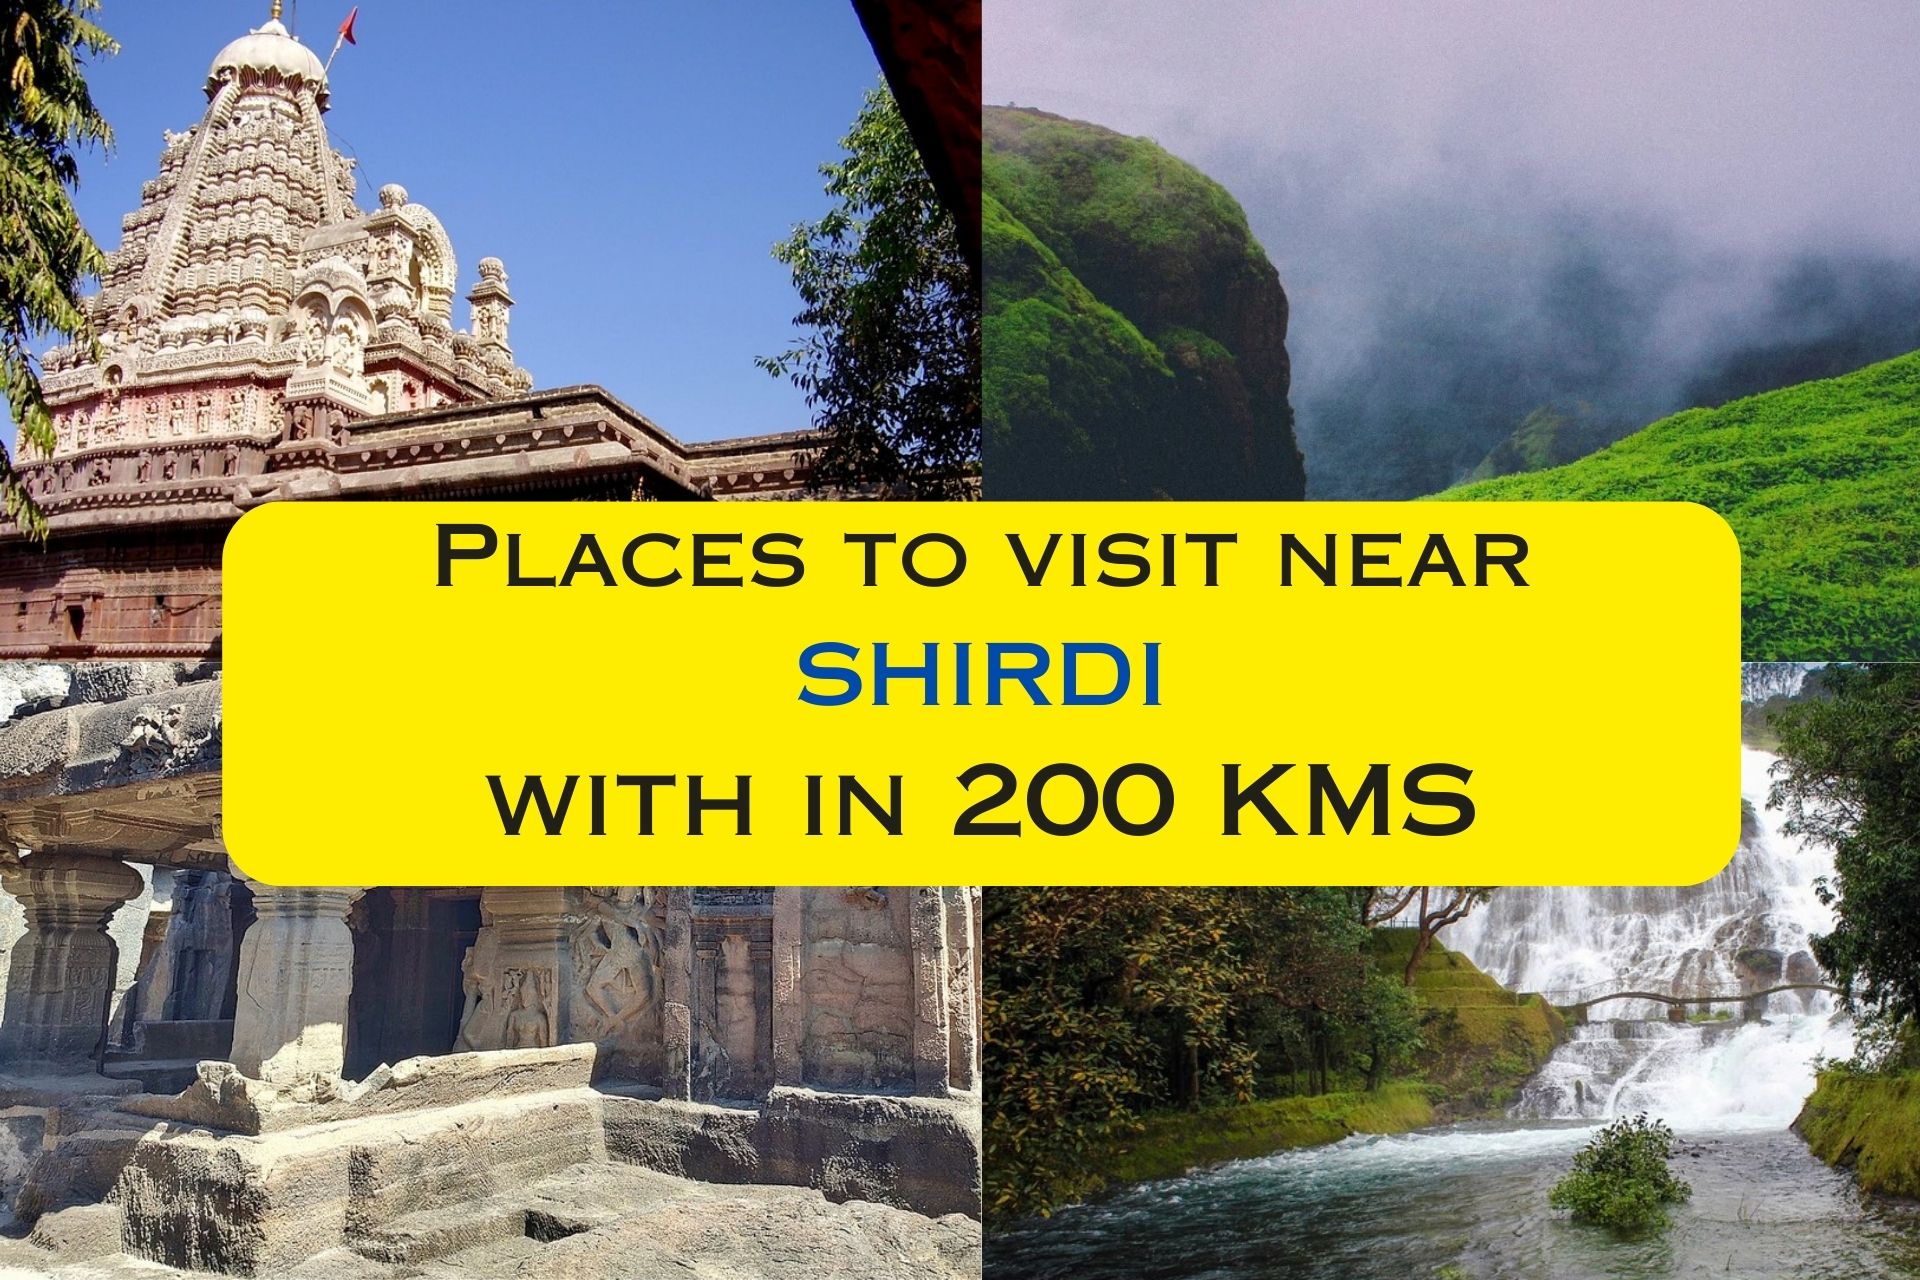 Places to visit near shirdi with in 200Kms